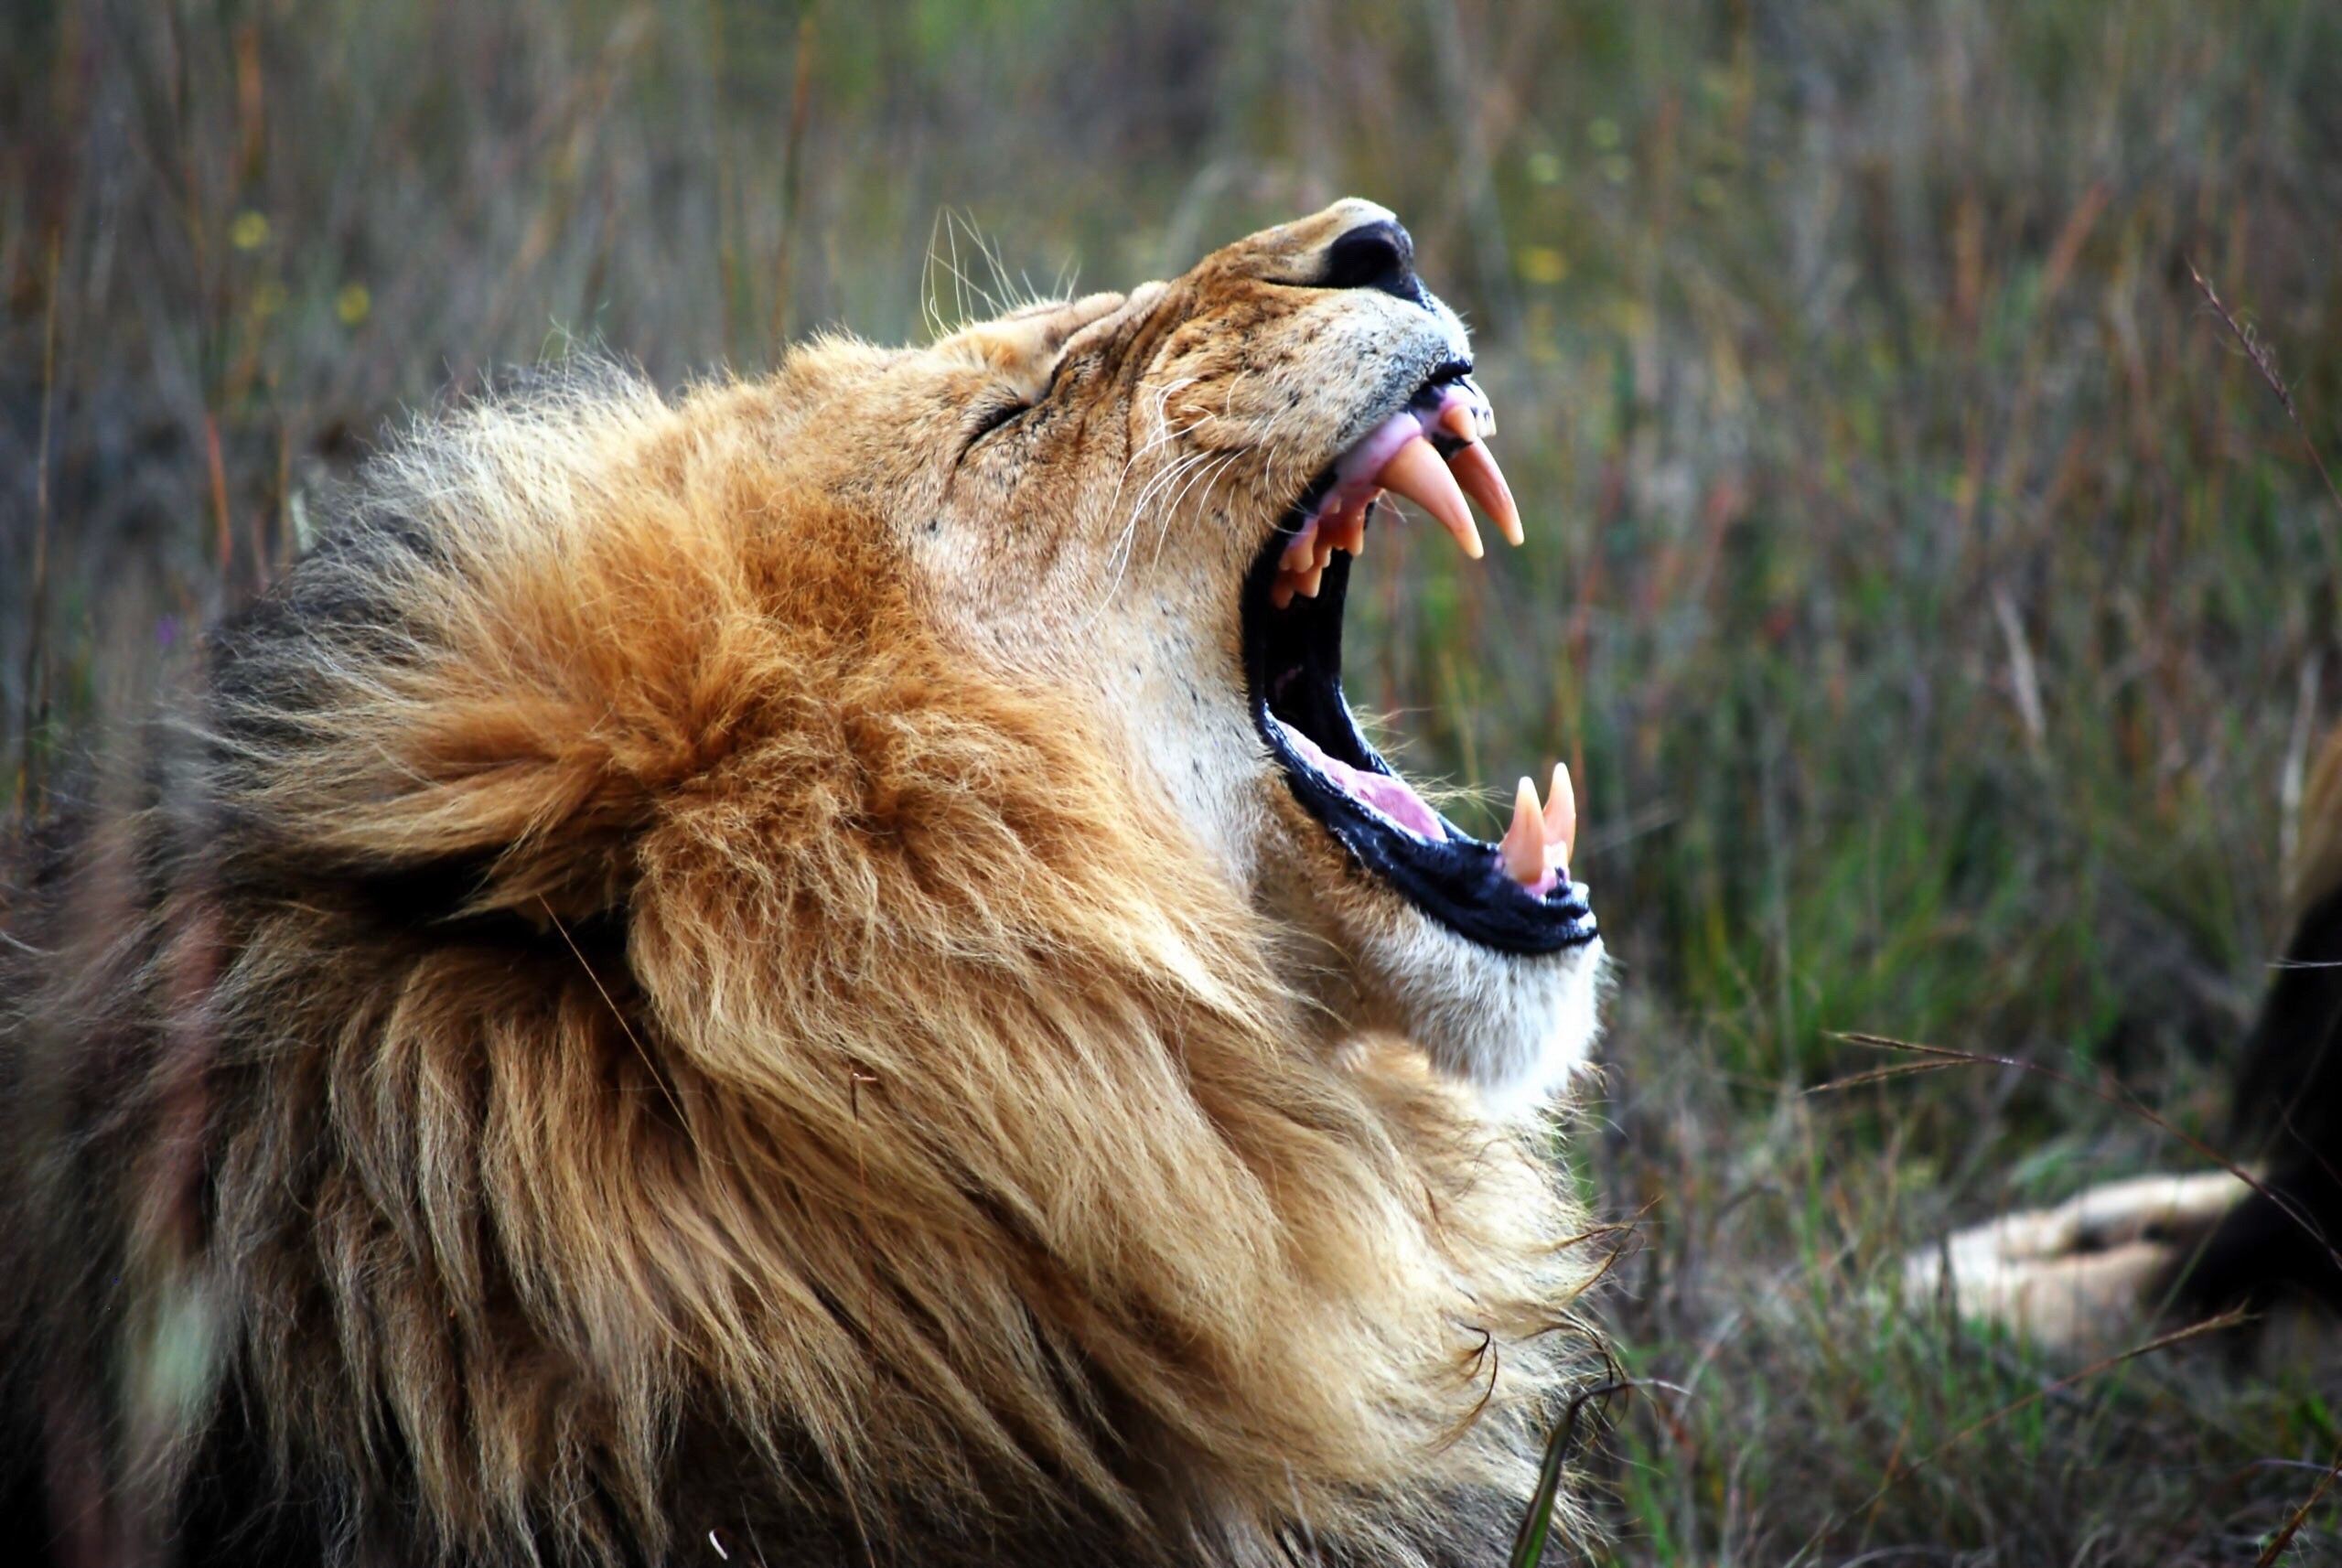 Why can only big cats roar?